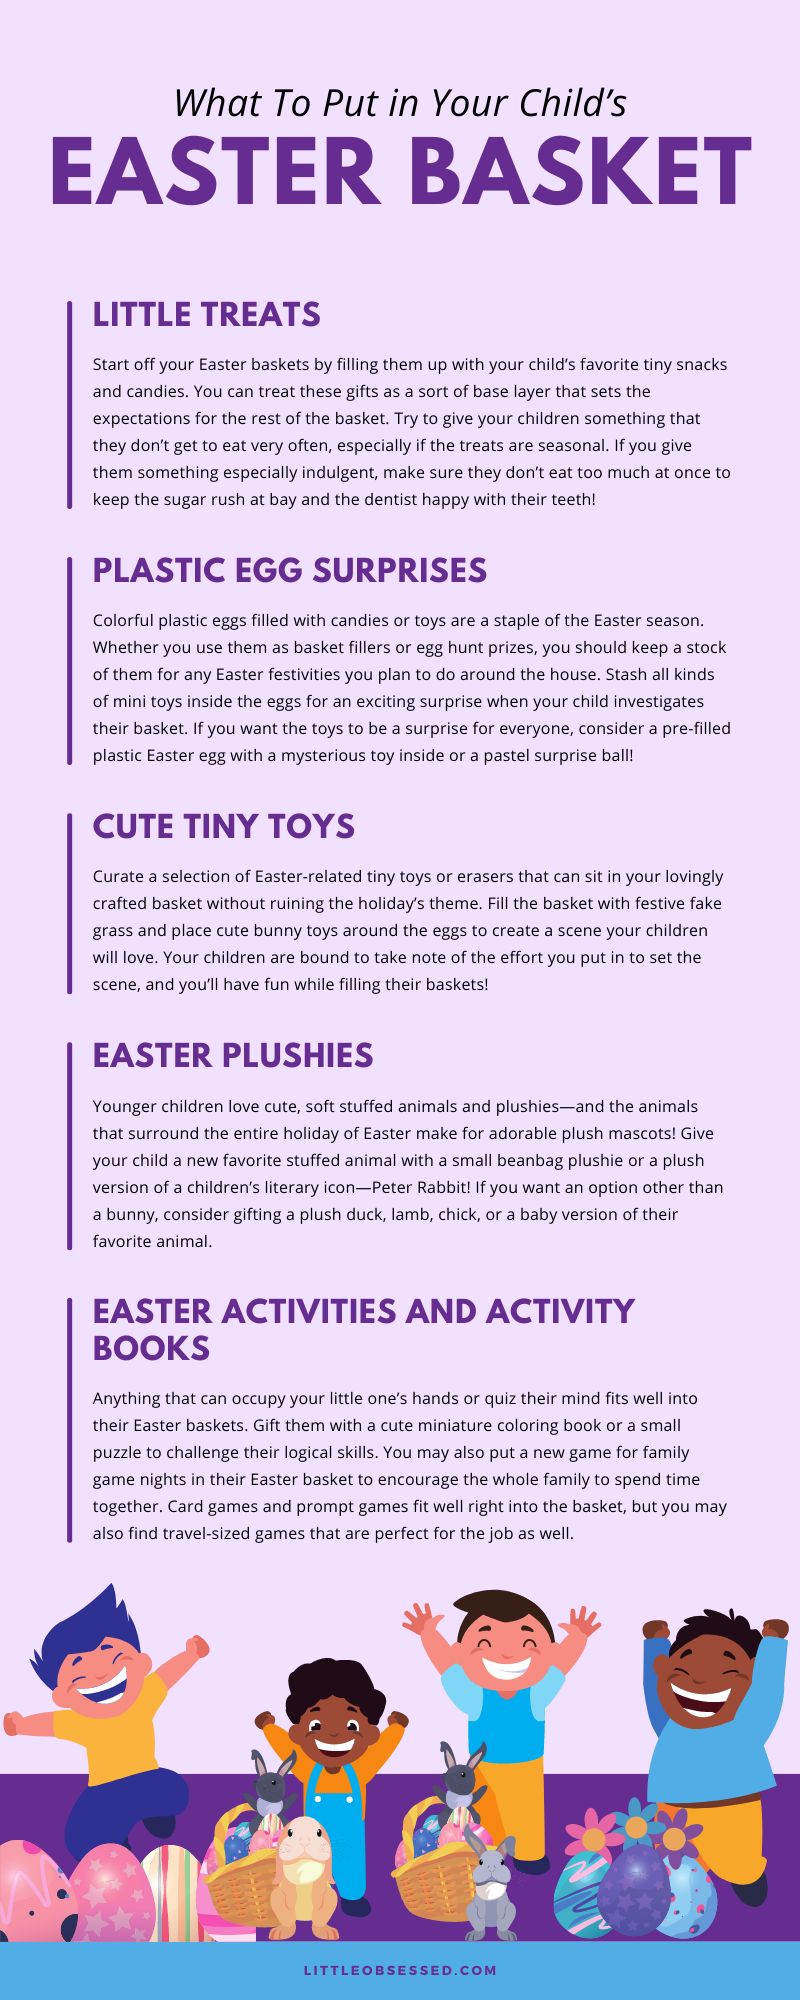 What To Put in Your Child’s Easter Basket